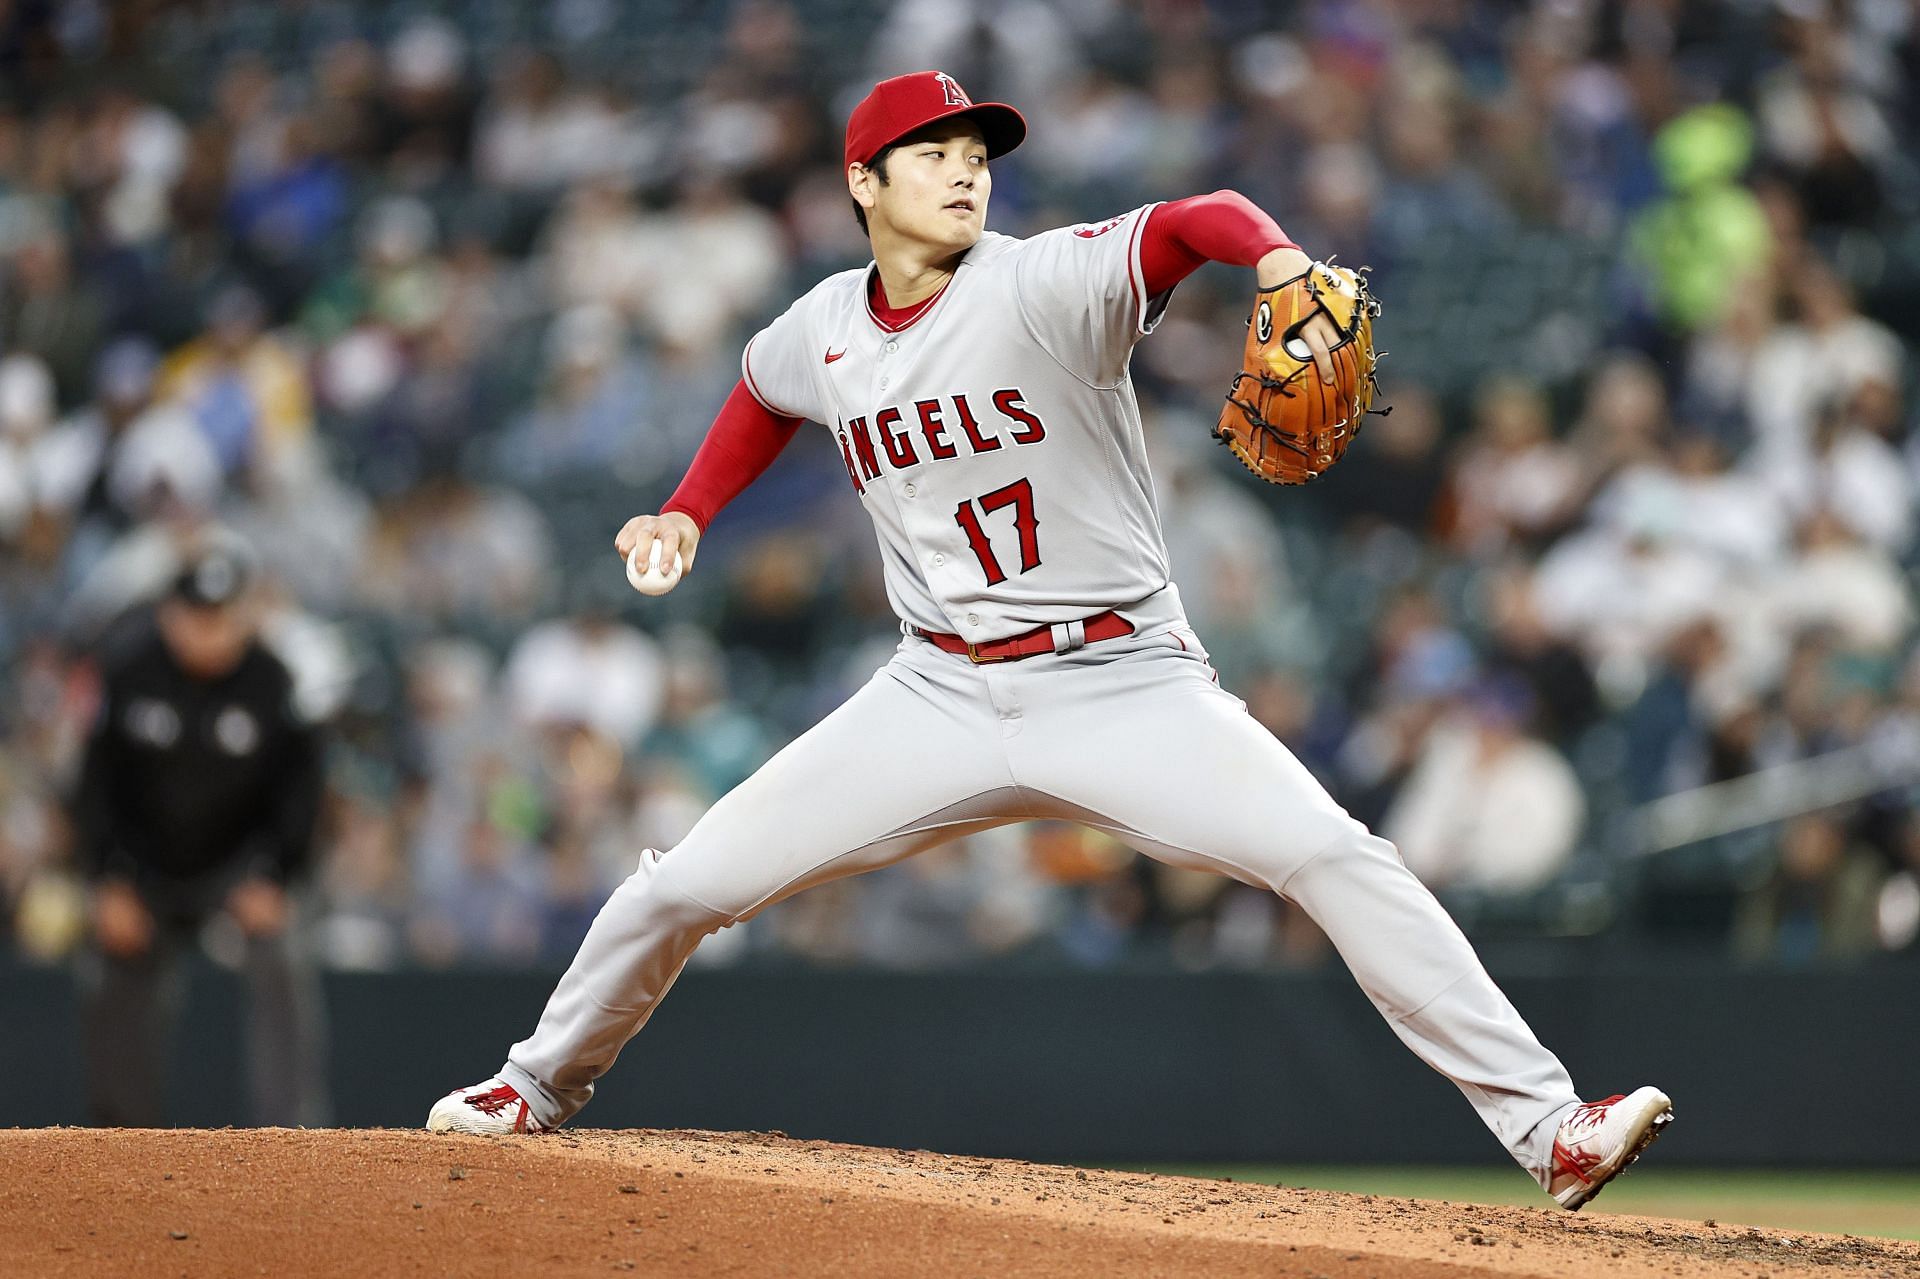 Shohei Ohtani pitches during last night's contest between the Los Angeles Angels and Seattle Mariners.